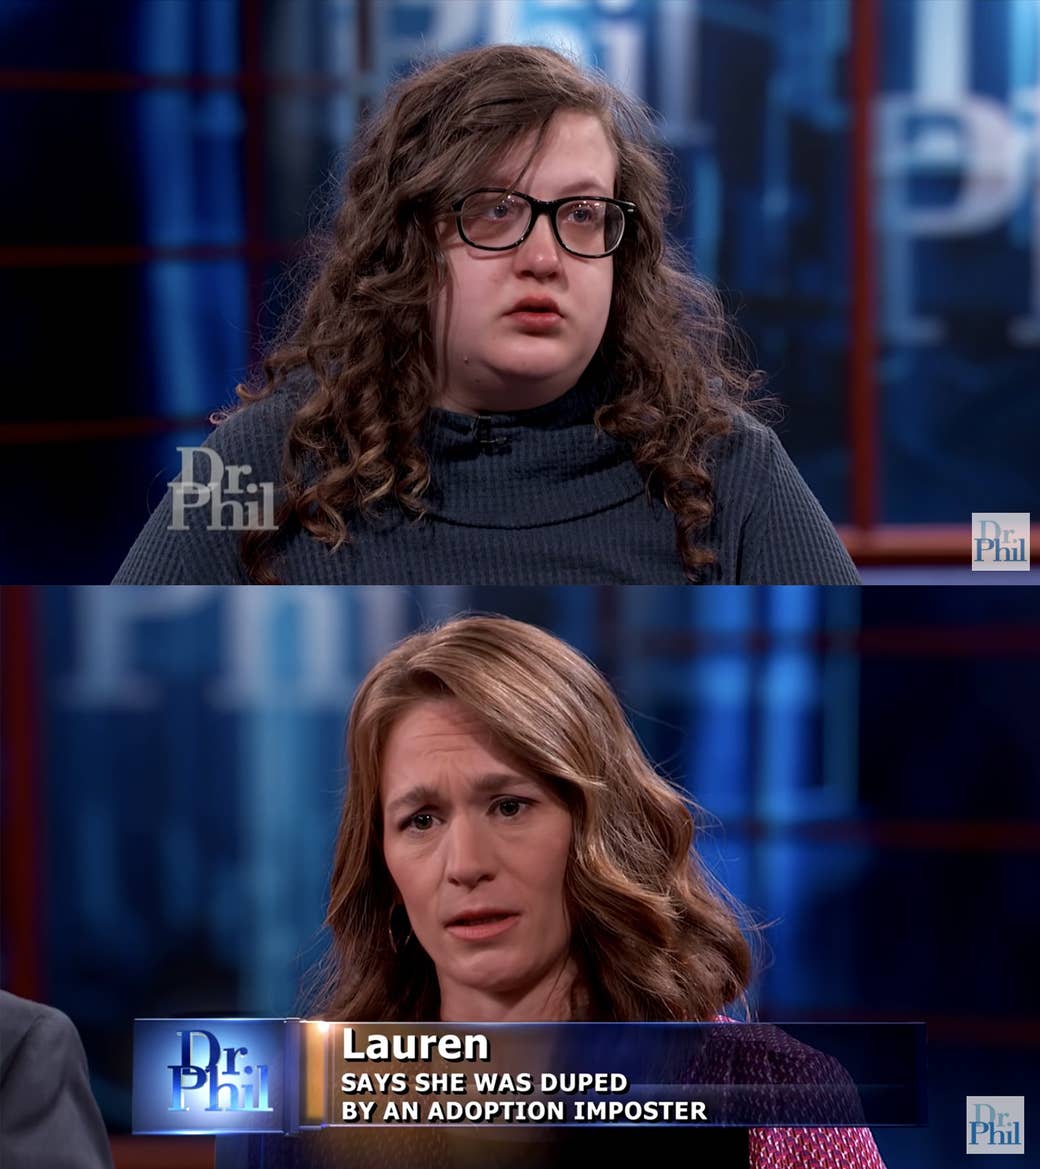 Two women on the Dr Phil program: Gabby, who wears glasses and a waffle print sweatshirt, and Lauren, whose chyron reads "says she was duped by an adoption imposter"